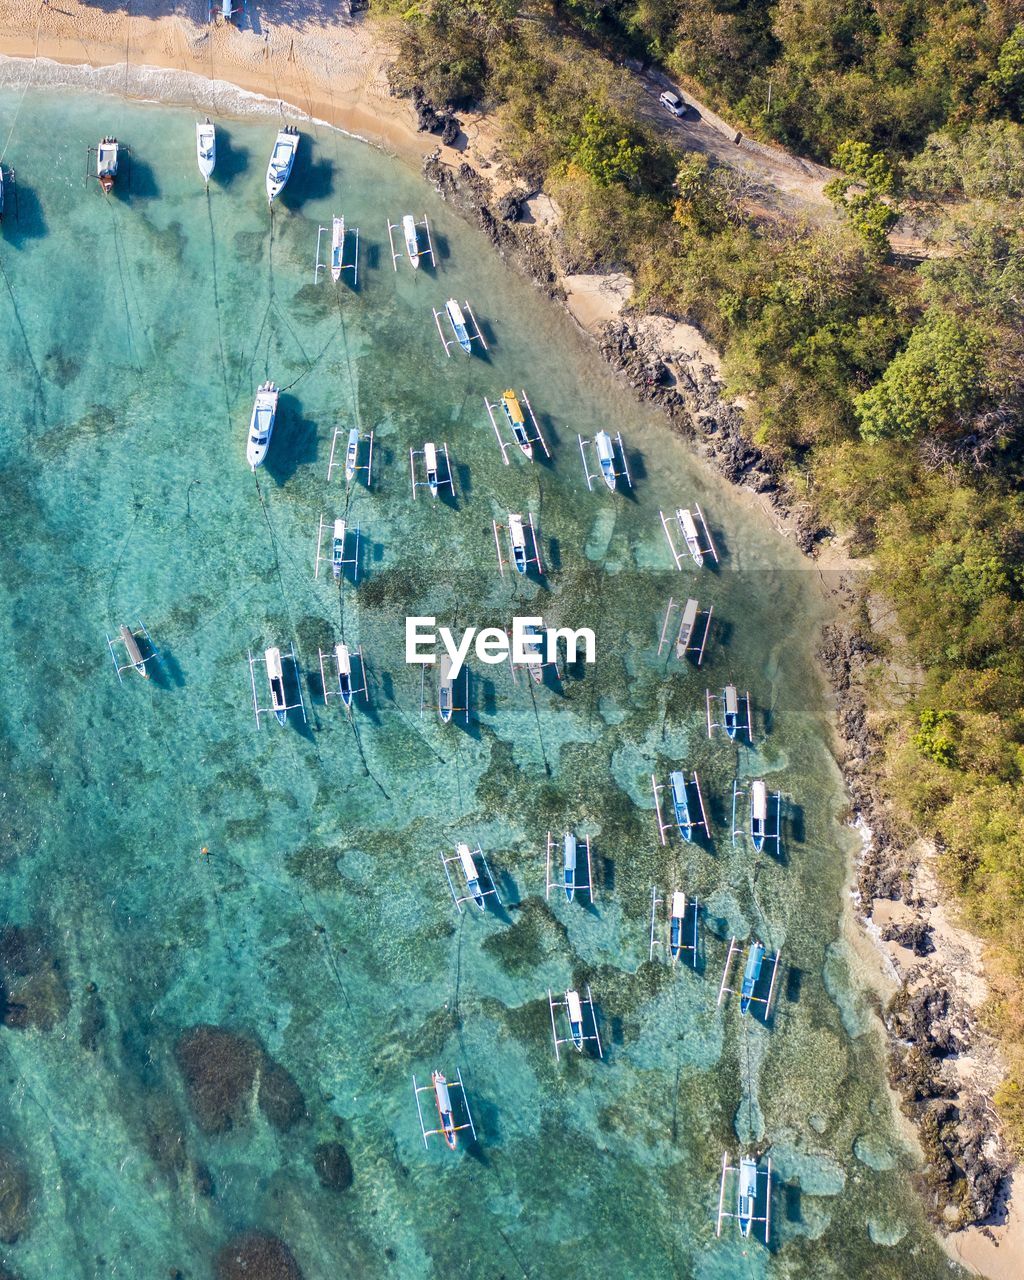 Aerial view of boats docked in a bay in bali, indonesia